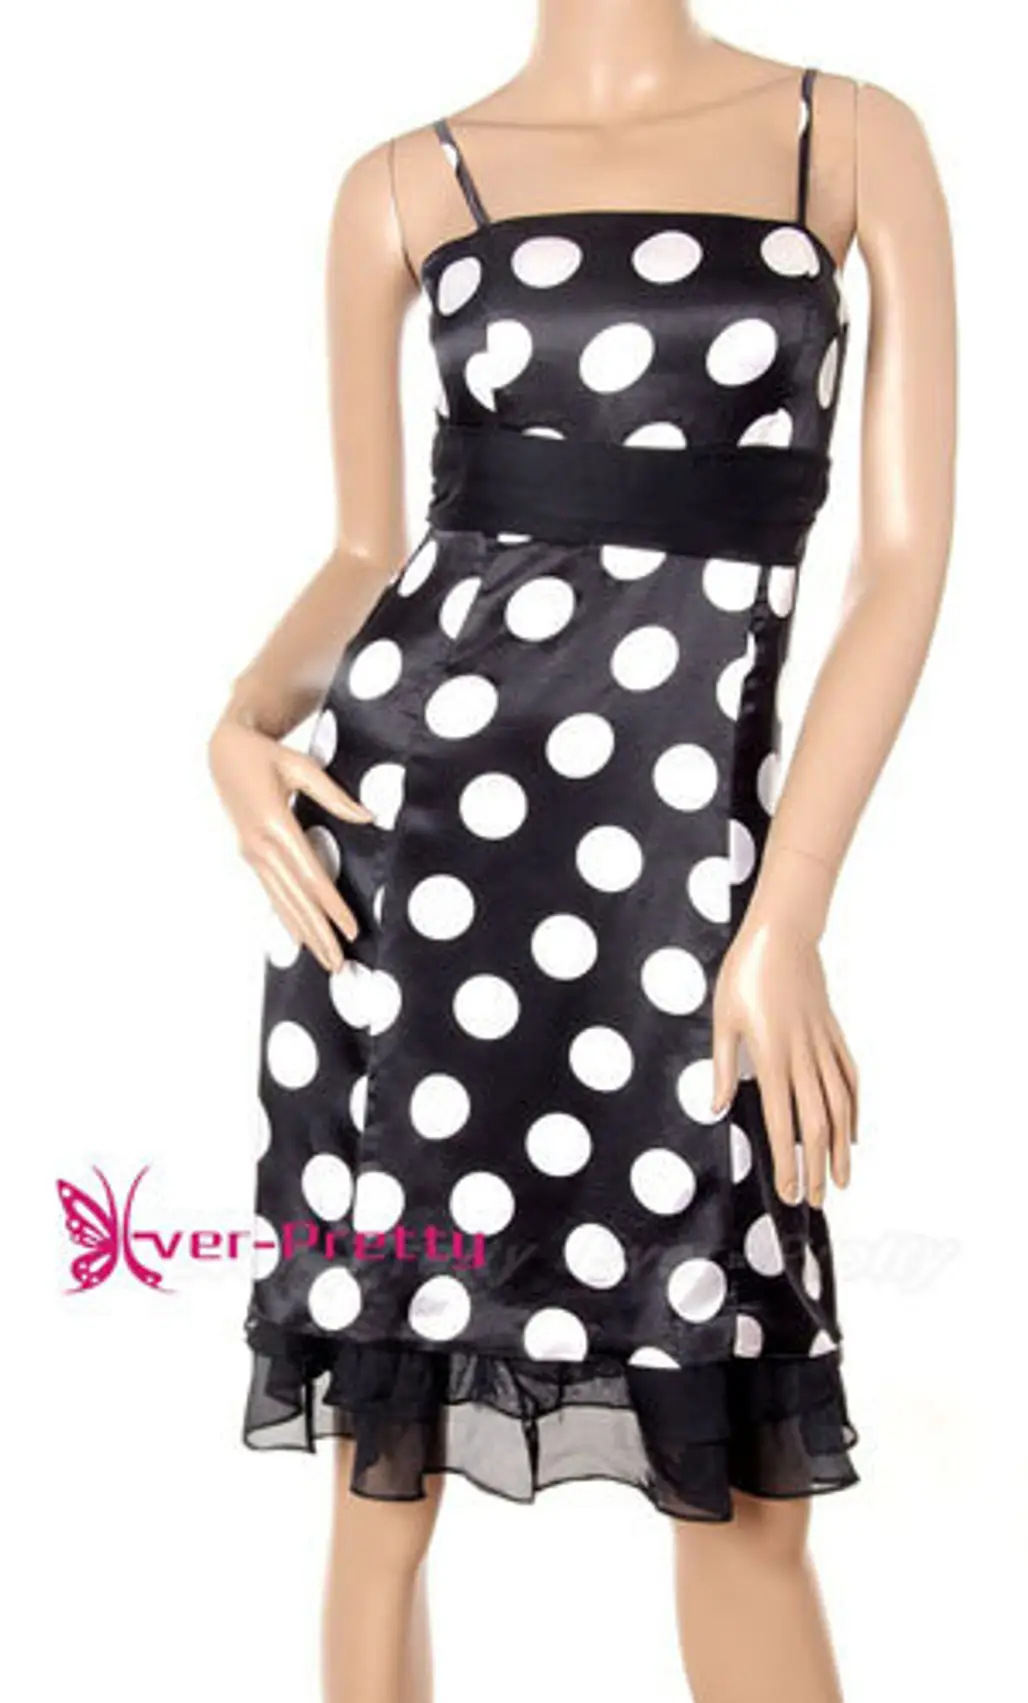 Excellent Black and White Empire Waist Cocktail Dress